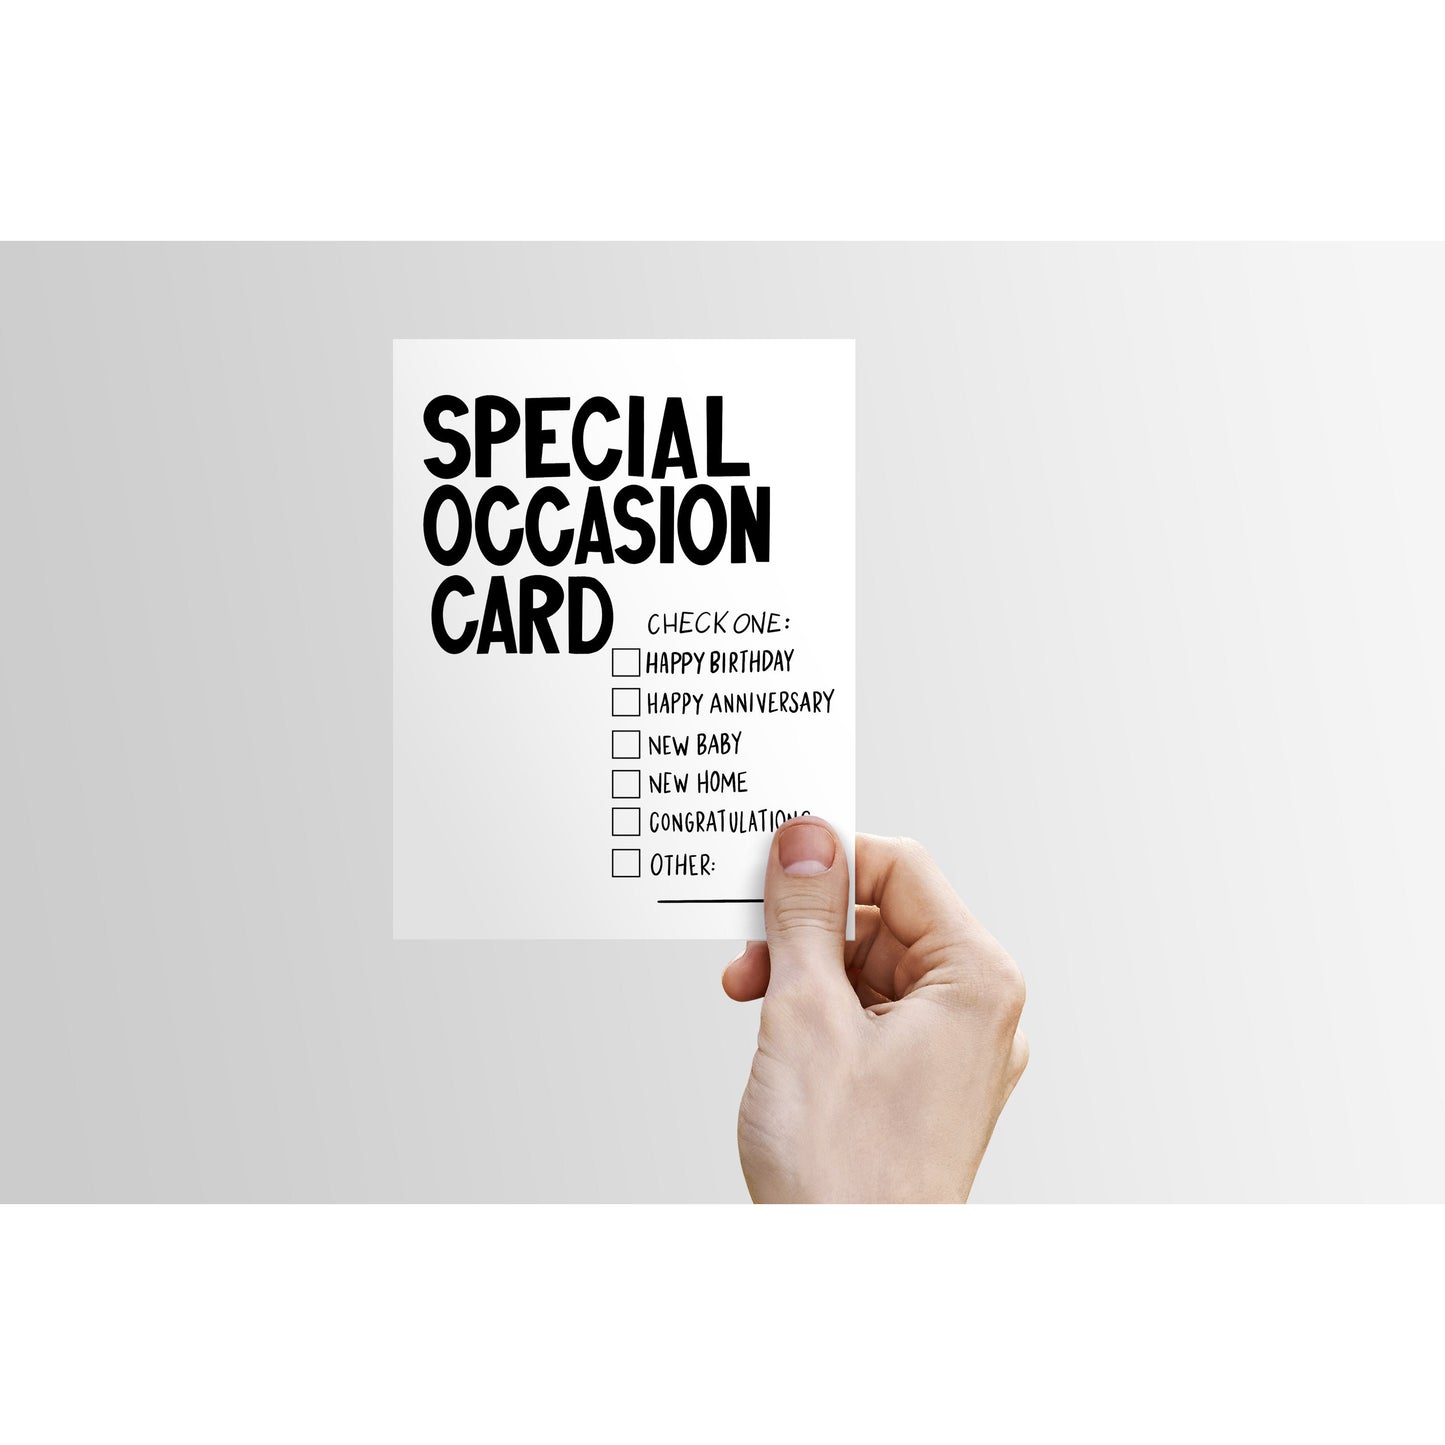 Special Occasion Card (check the box to indicate WHICH special occasion) - Greet